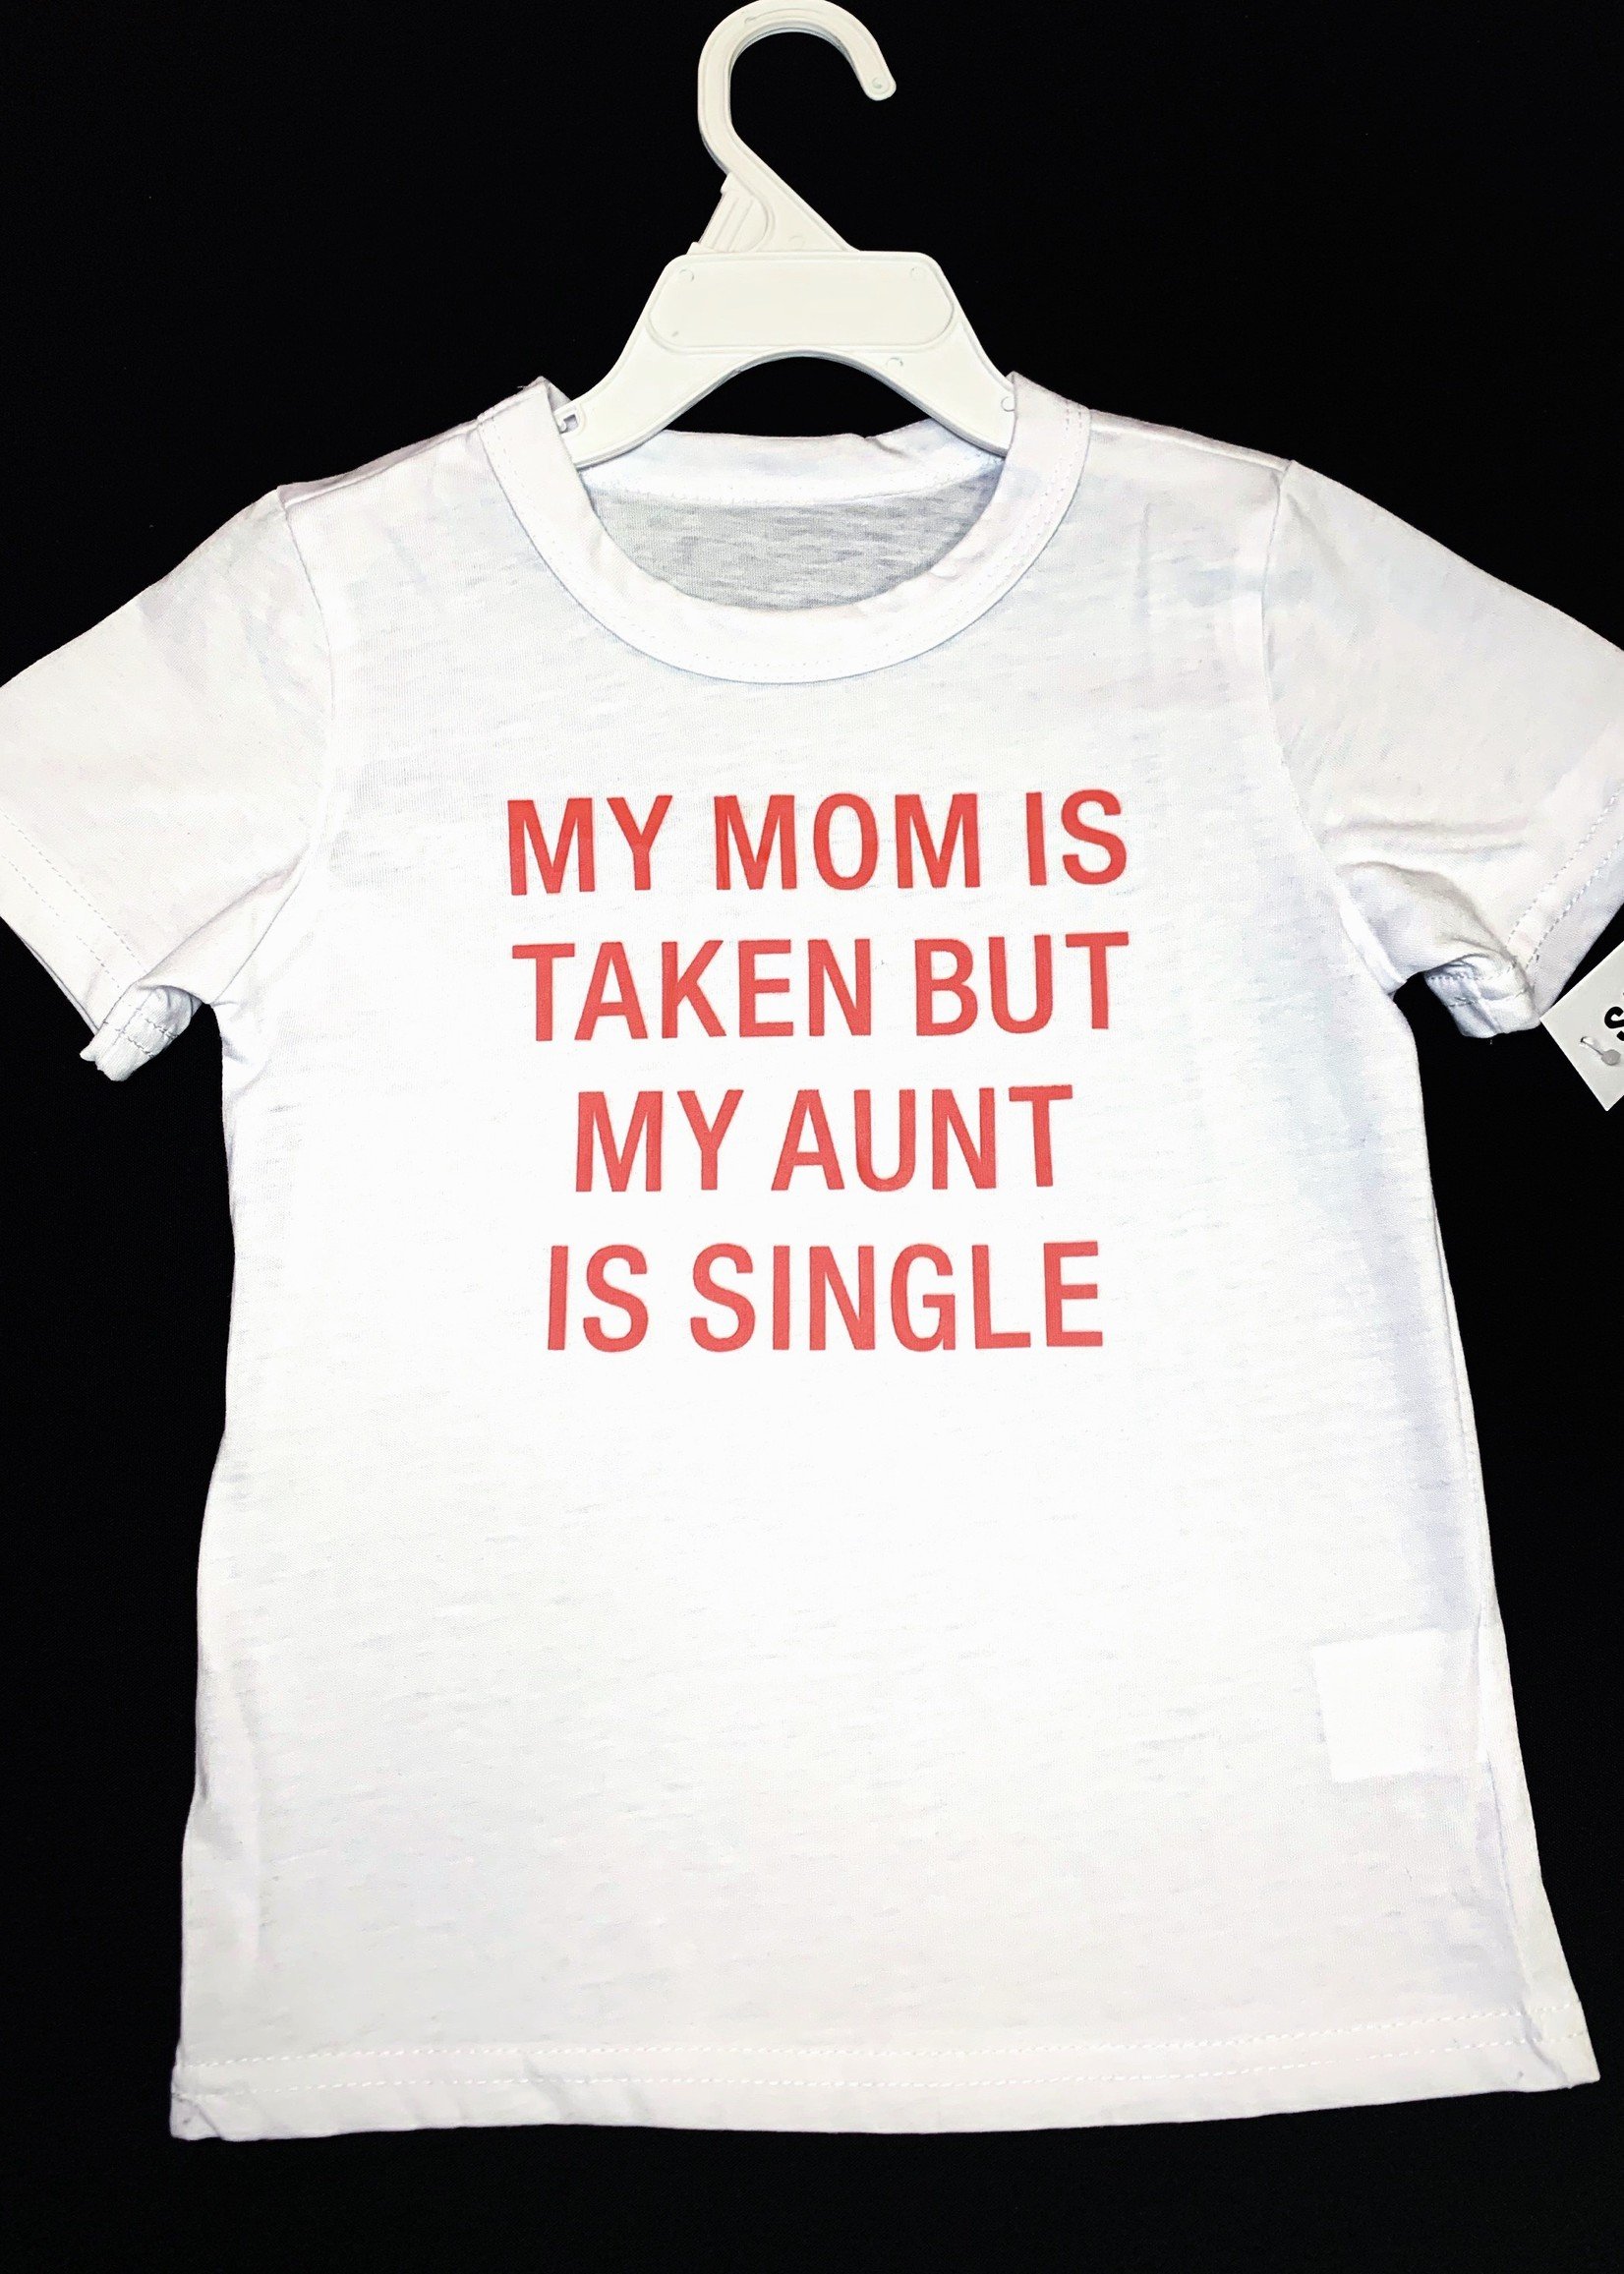 About Face Designs Aunt is single toddler Tee 2T